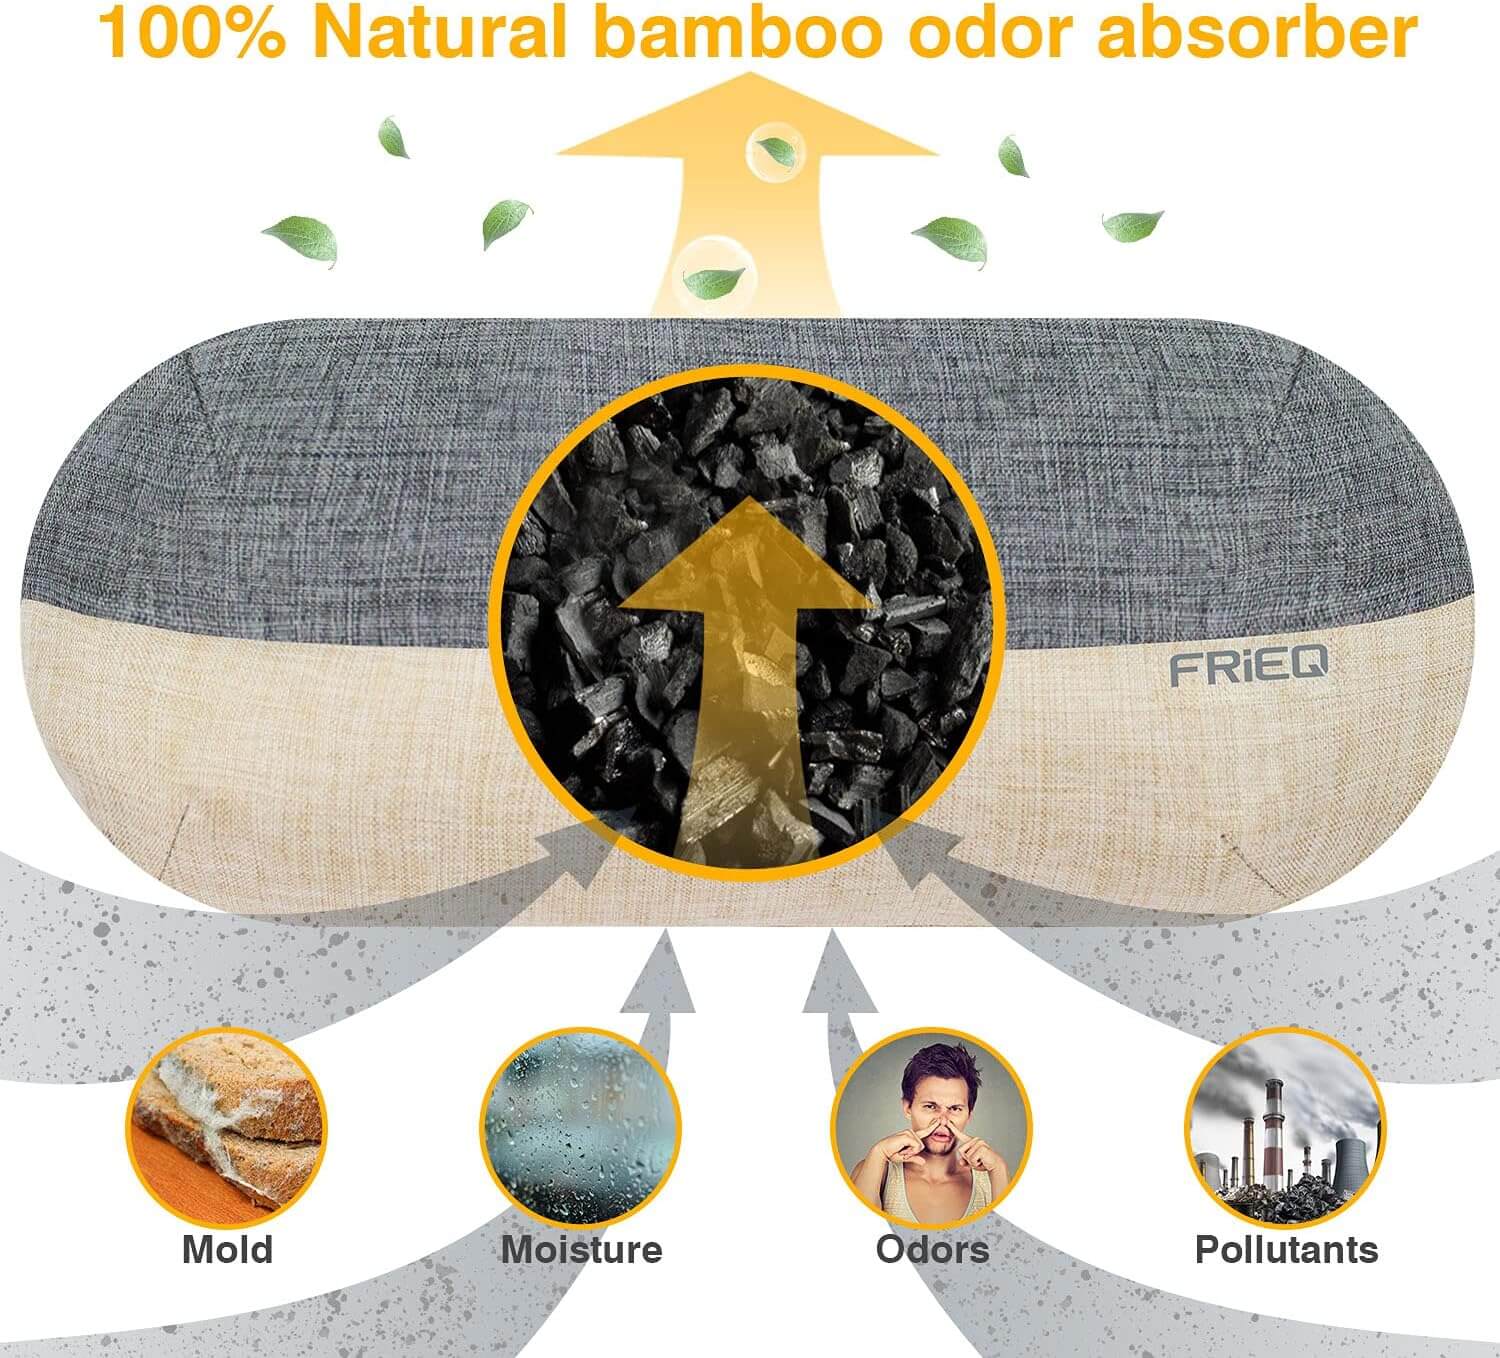 FRiEQ Car Air Freshener, 100% Activated Bamboo Charcoal Air Purifying Bag | Lasts 365+ Days | Fragrance-Free Deodorizer - Absorb Smoke Smell and Bad Odors（2 Pack） - 100% Natural Bamboo Odor Absorber